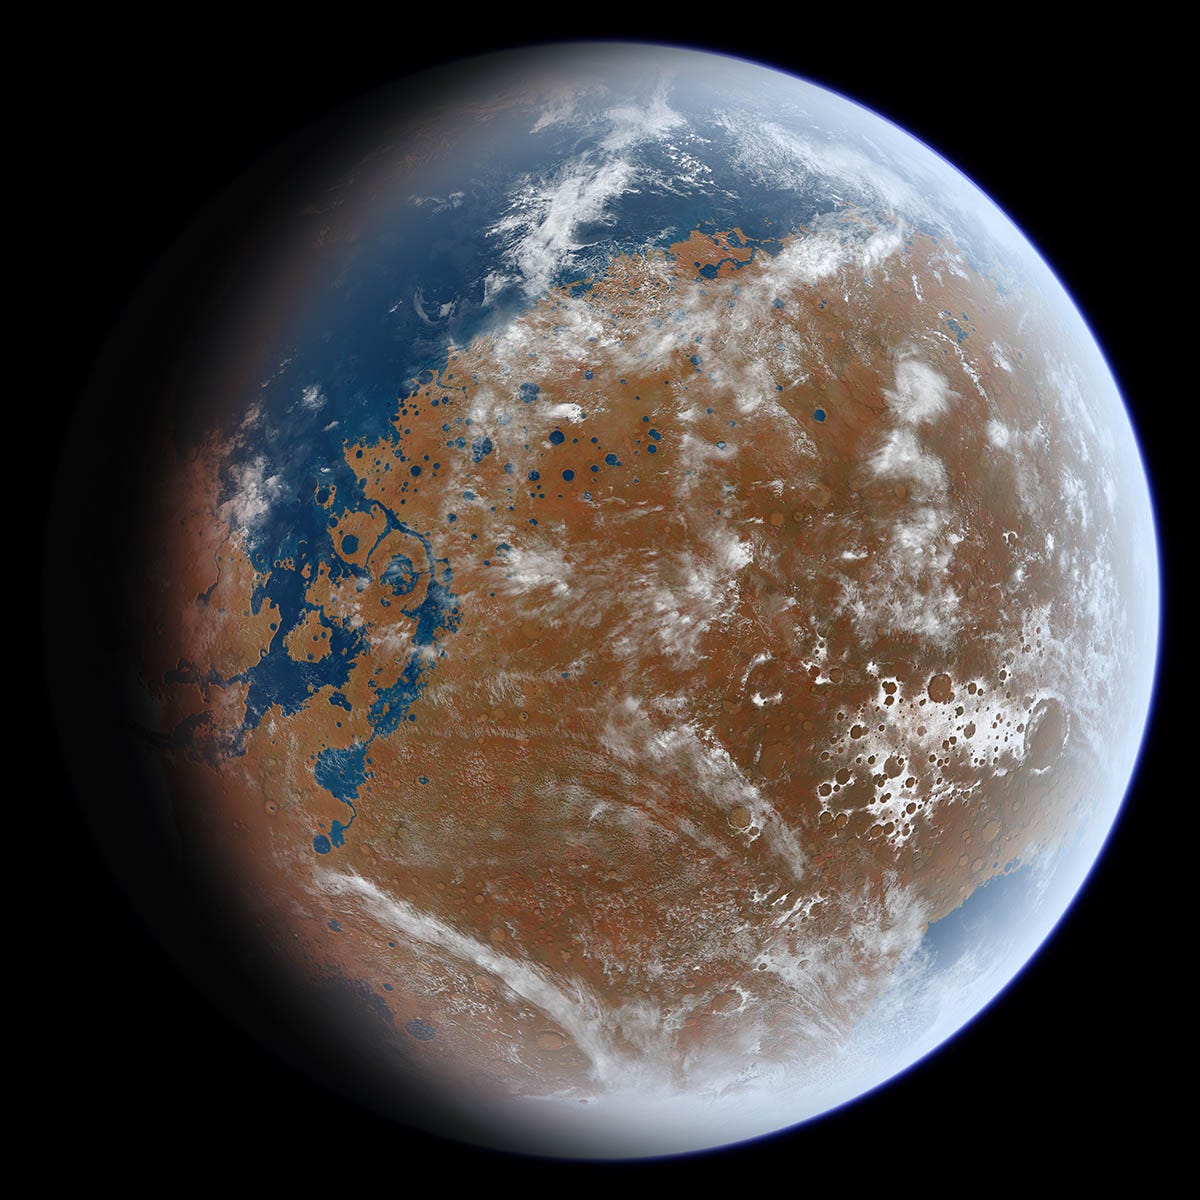 Artist’s rendering of what ancient mars may have looked like billions of years ago.